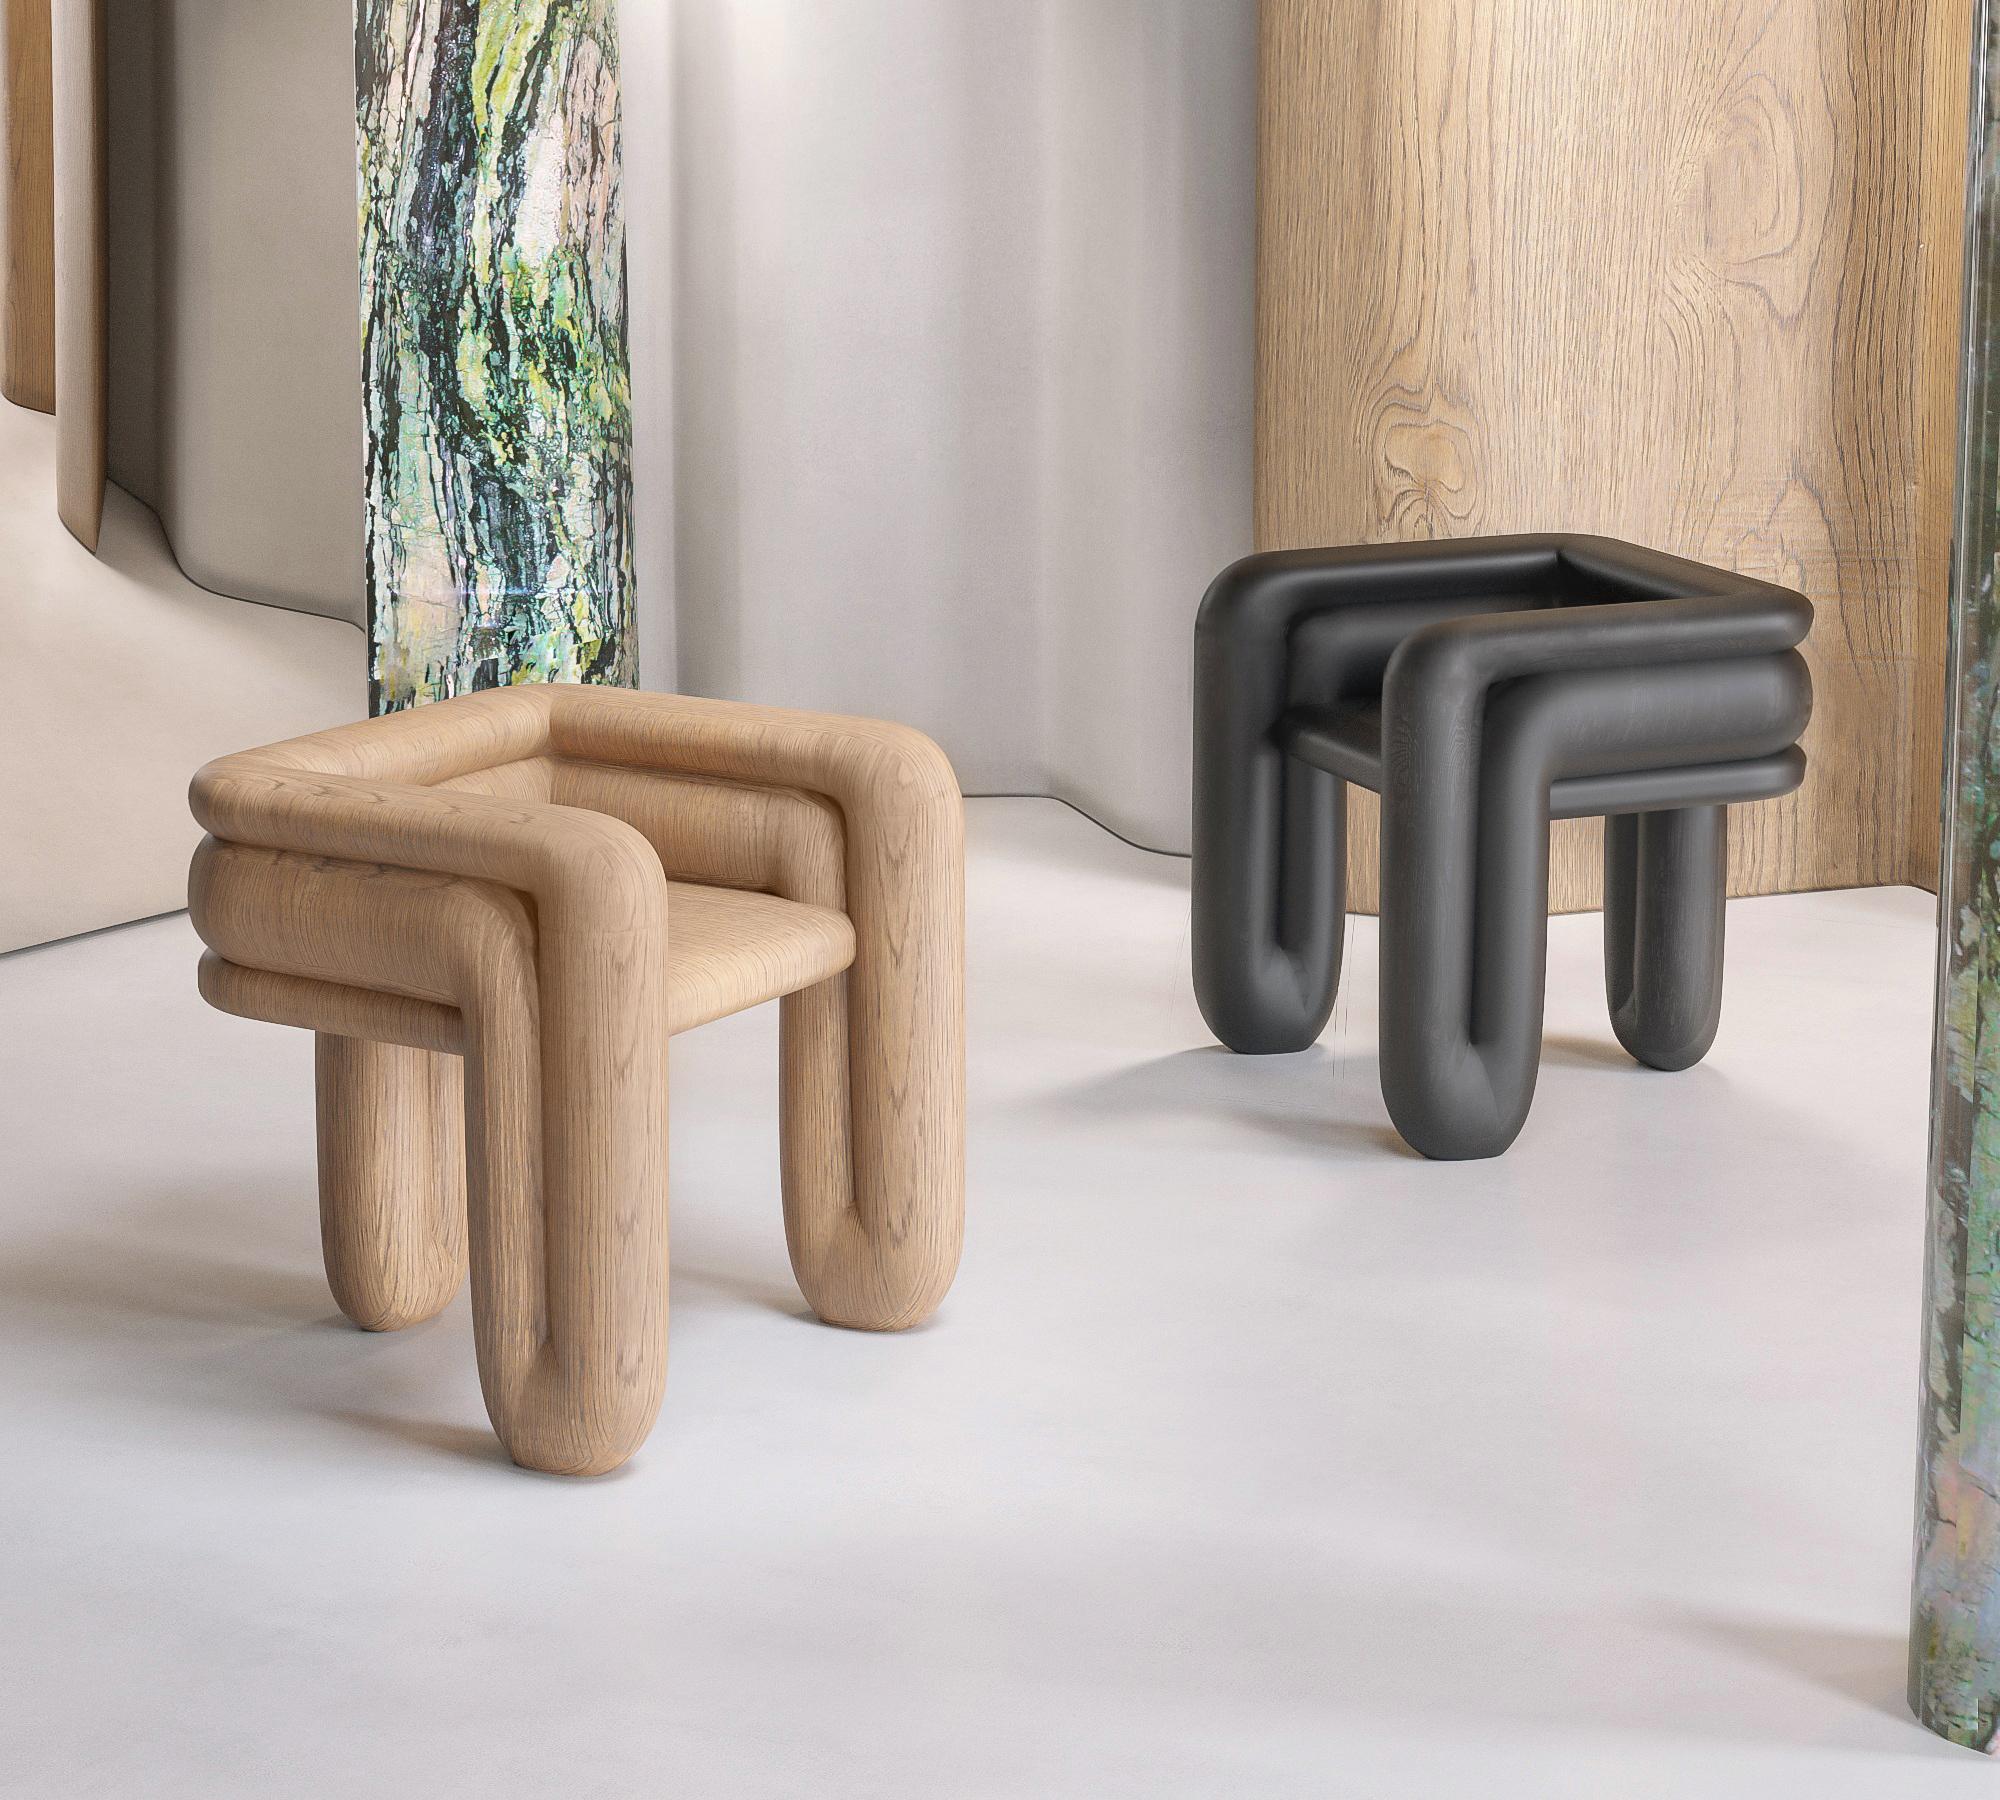 Enigma Wood Accent Chair by Alter Ego Studio
Dimensions: D 66 x W 83 x H 41 cm. 
Materials: Lacquered MDF.
Also available in oak.

Imitation of curved pipes having a single closed contour.
The pipes have different diameters in an asymmetric